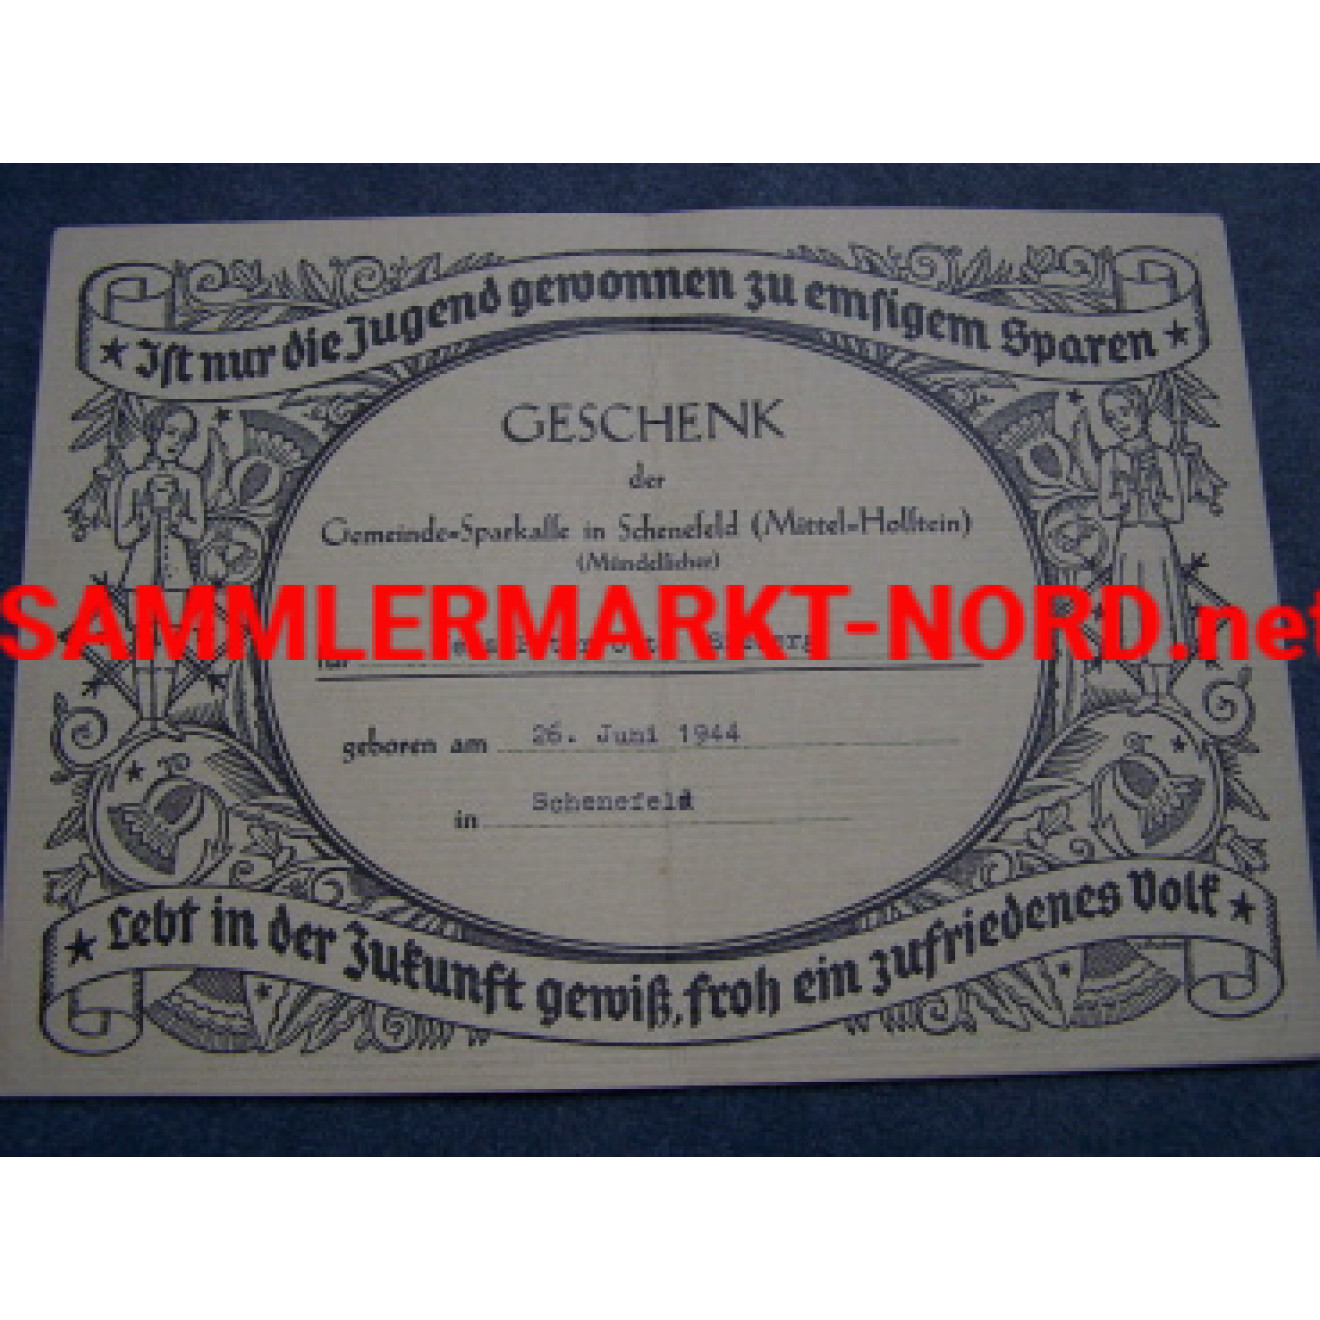 Gift coupon (3 RM) of the bank Schenefeld to the birth 1944